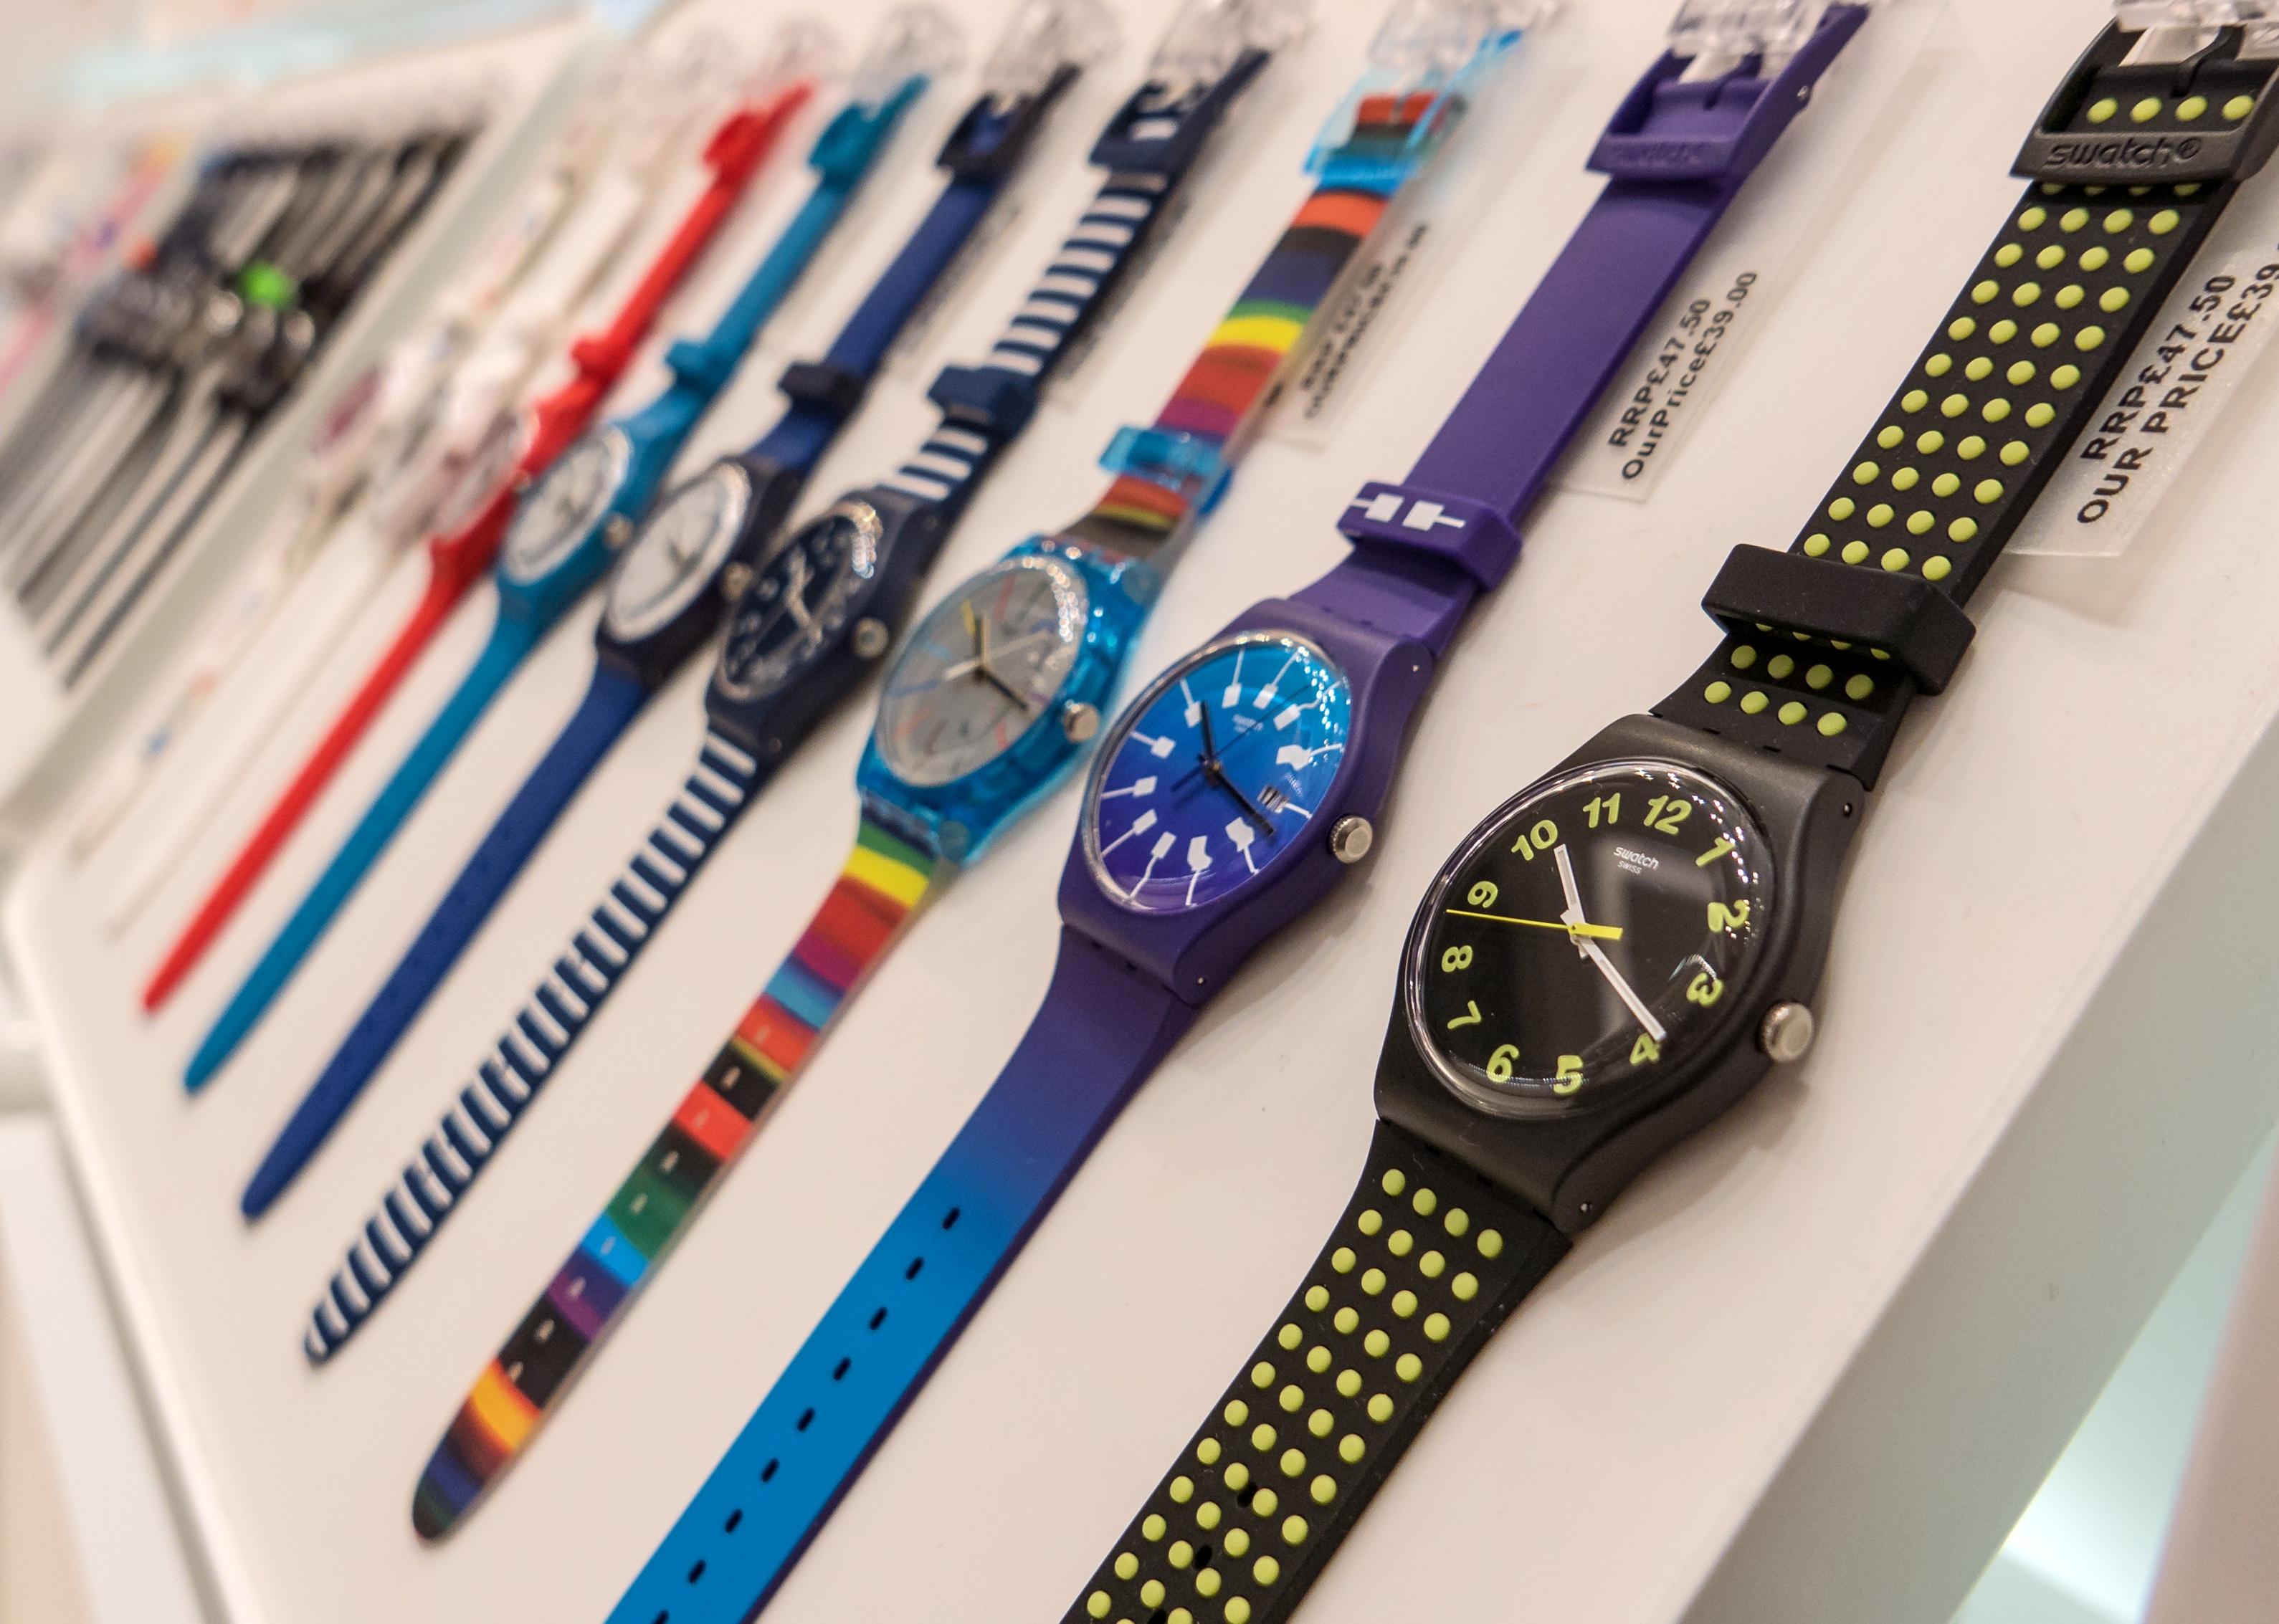 Swatch watches on display.